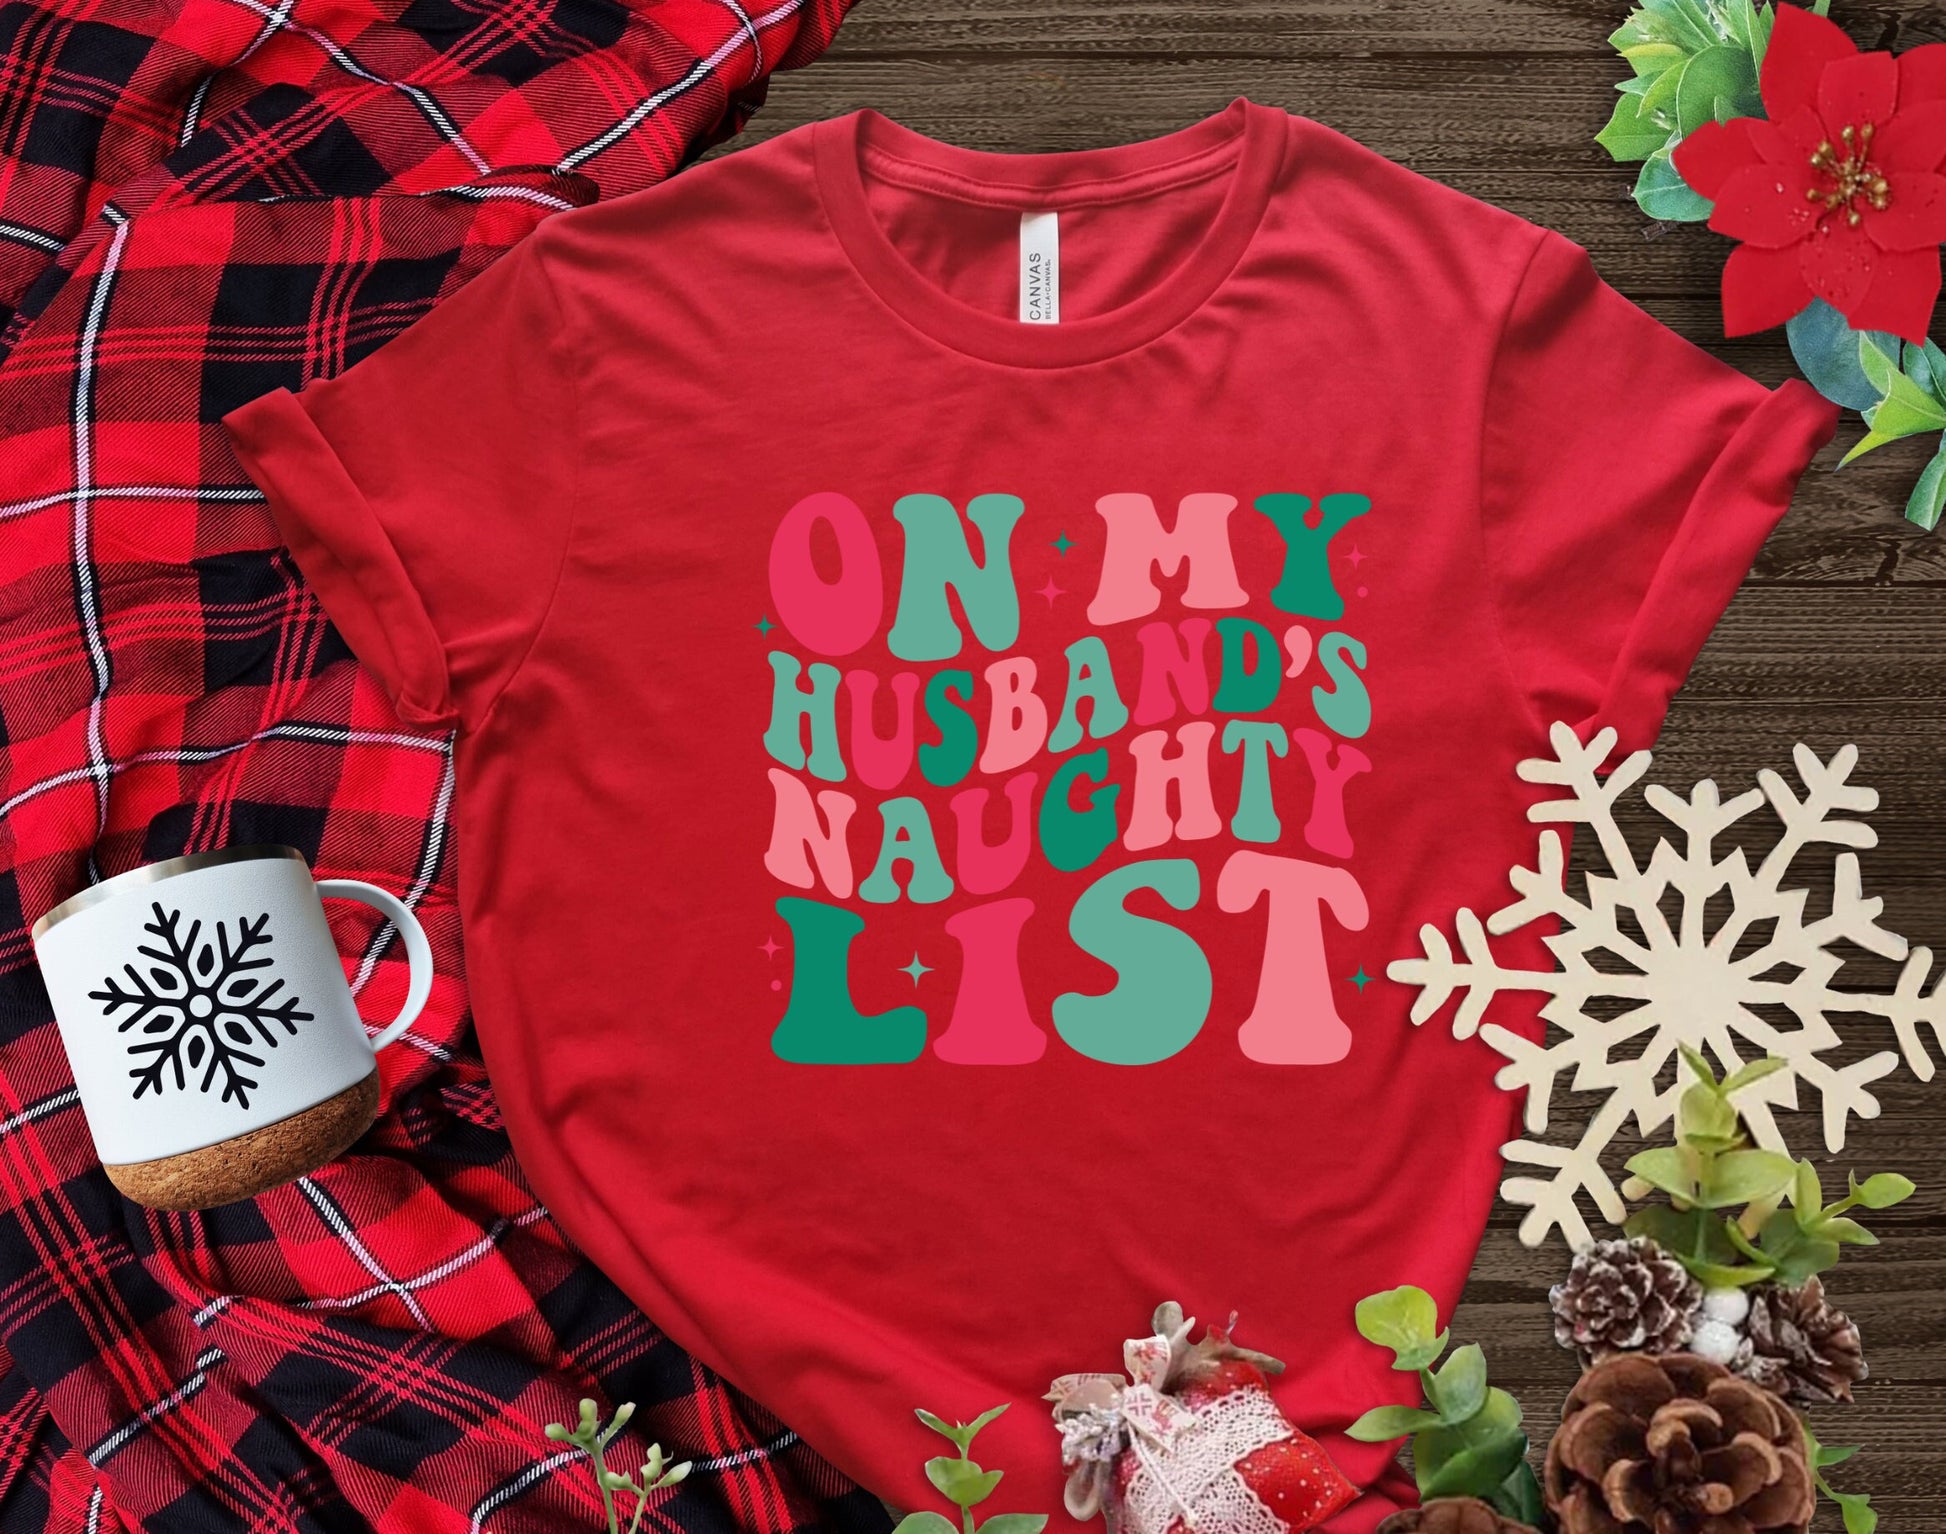 The On My Husbands Naughty List Christmas Shirt Makes the Perfect Gift for Friends, Family, Coworkers or yourself.  Check Out My Shop for even more Great Designs.  www.scorpiontees.etsy.com